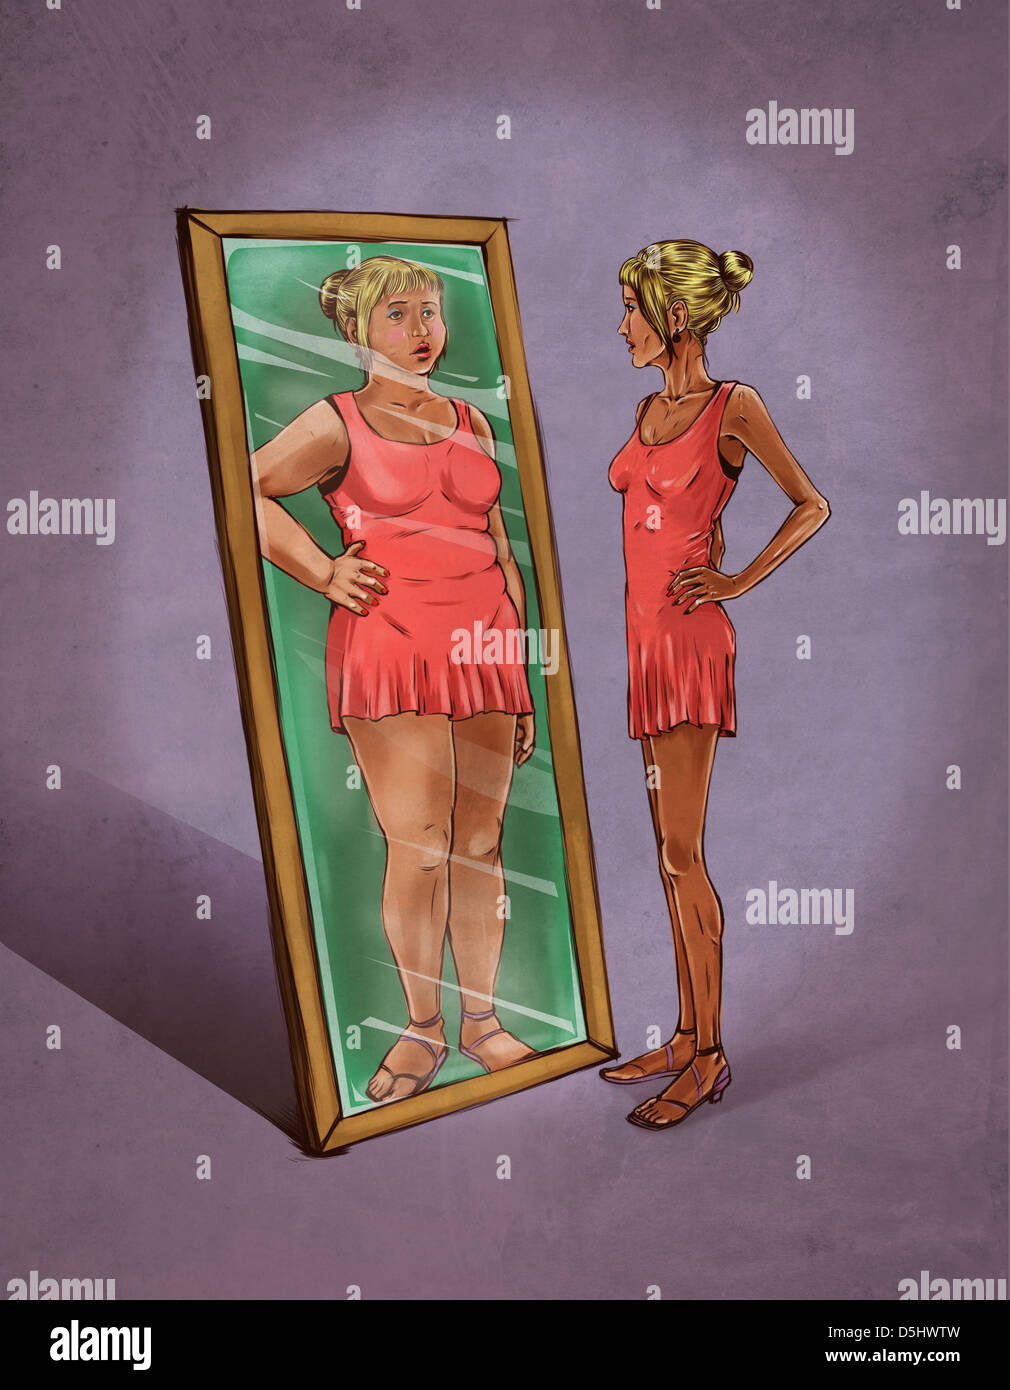 Illustrative image of woman looking in mirror sees herself as overweight representing eating disorder Stock Photo